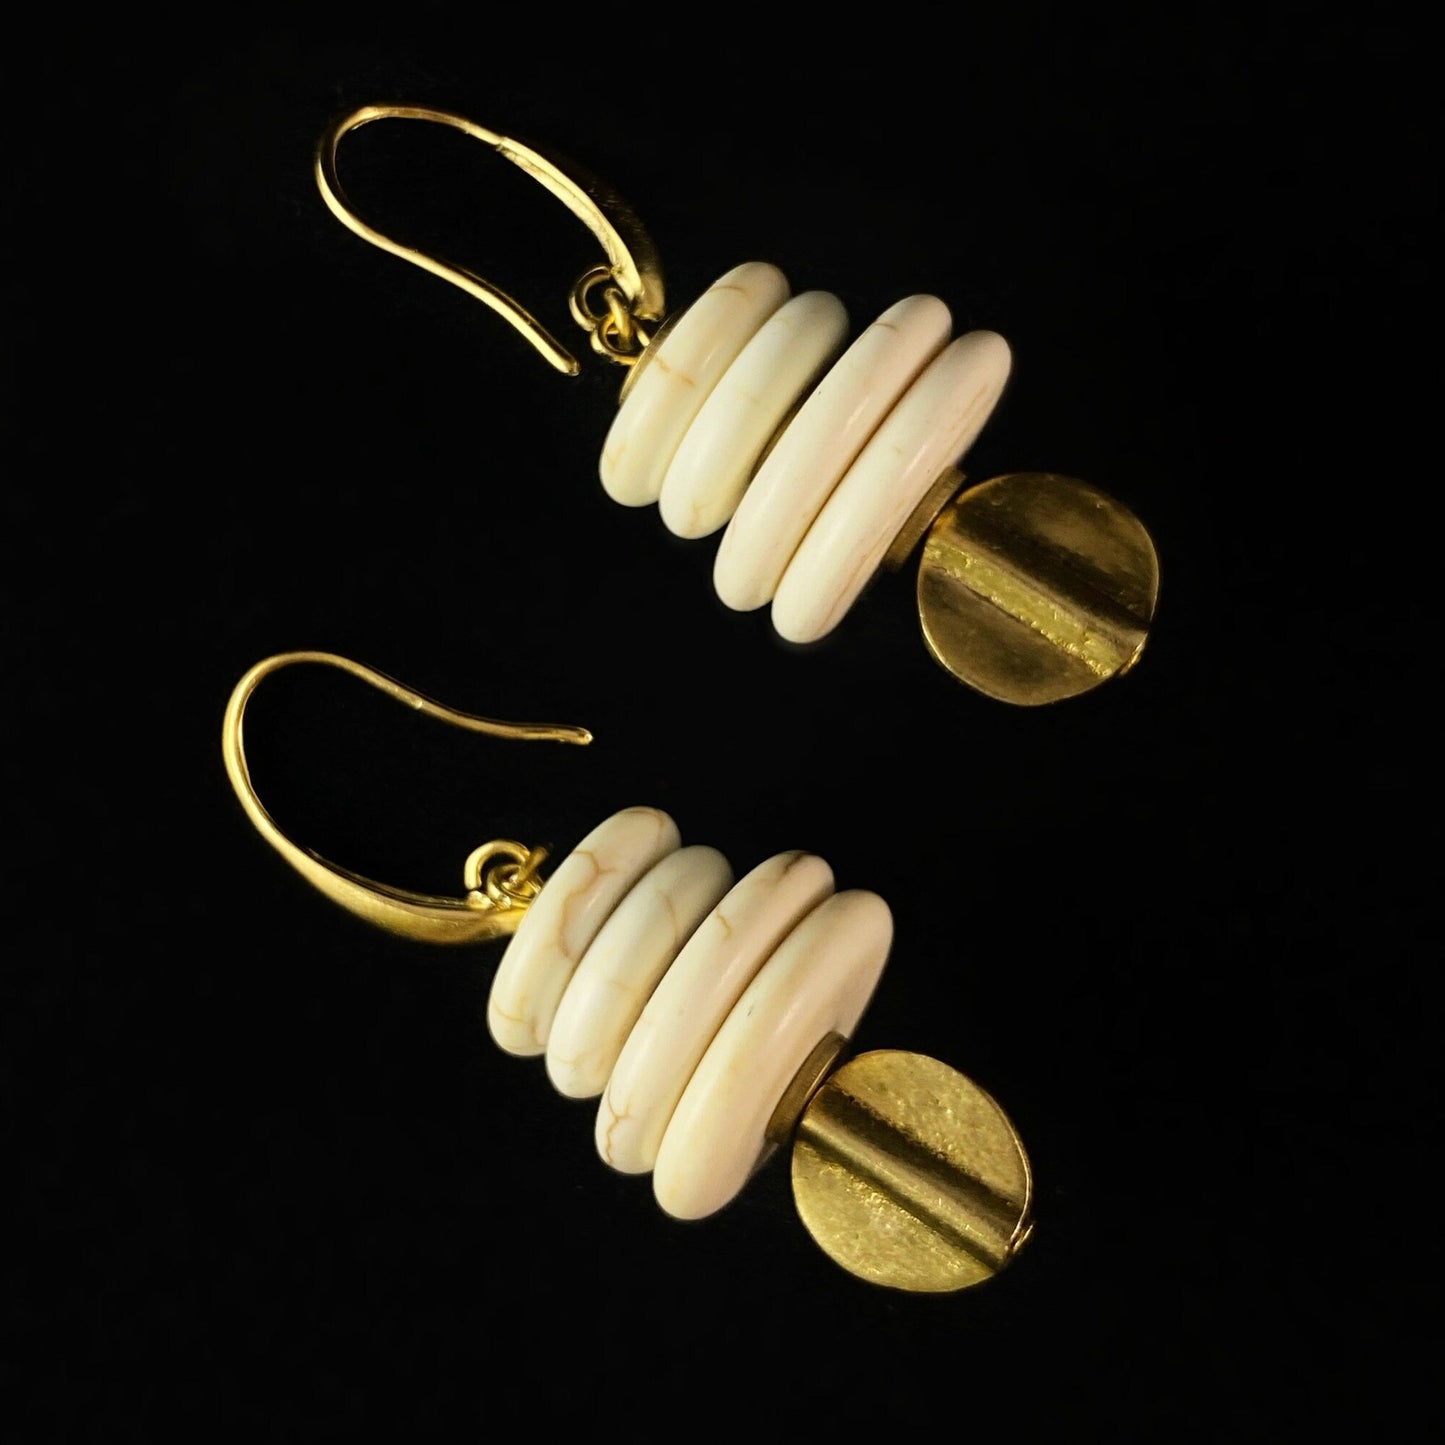 Gold and White Drop Earrings - 18kt Gold Over Brass with White Magnesite, David Aubrey Jewelry